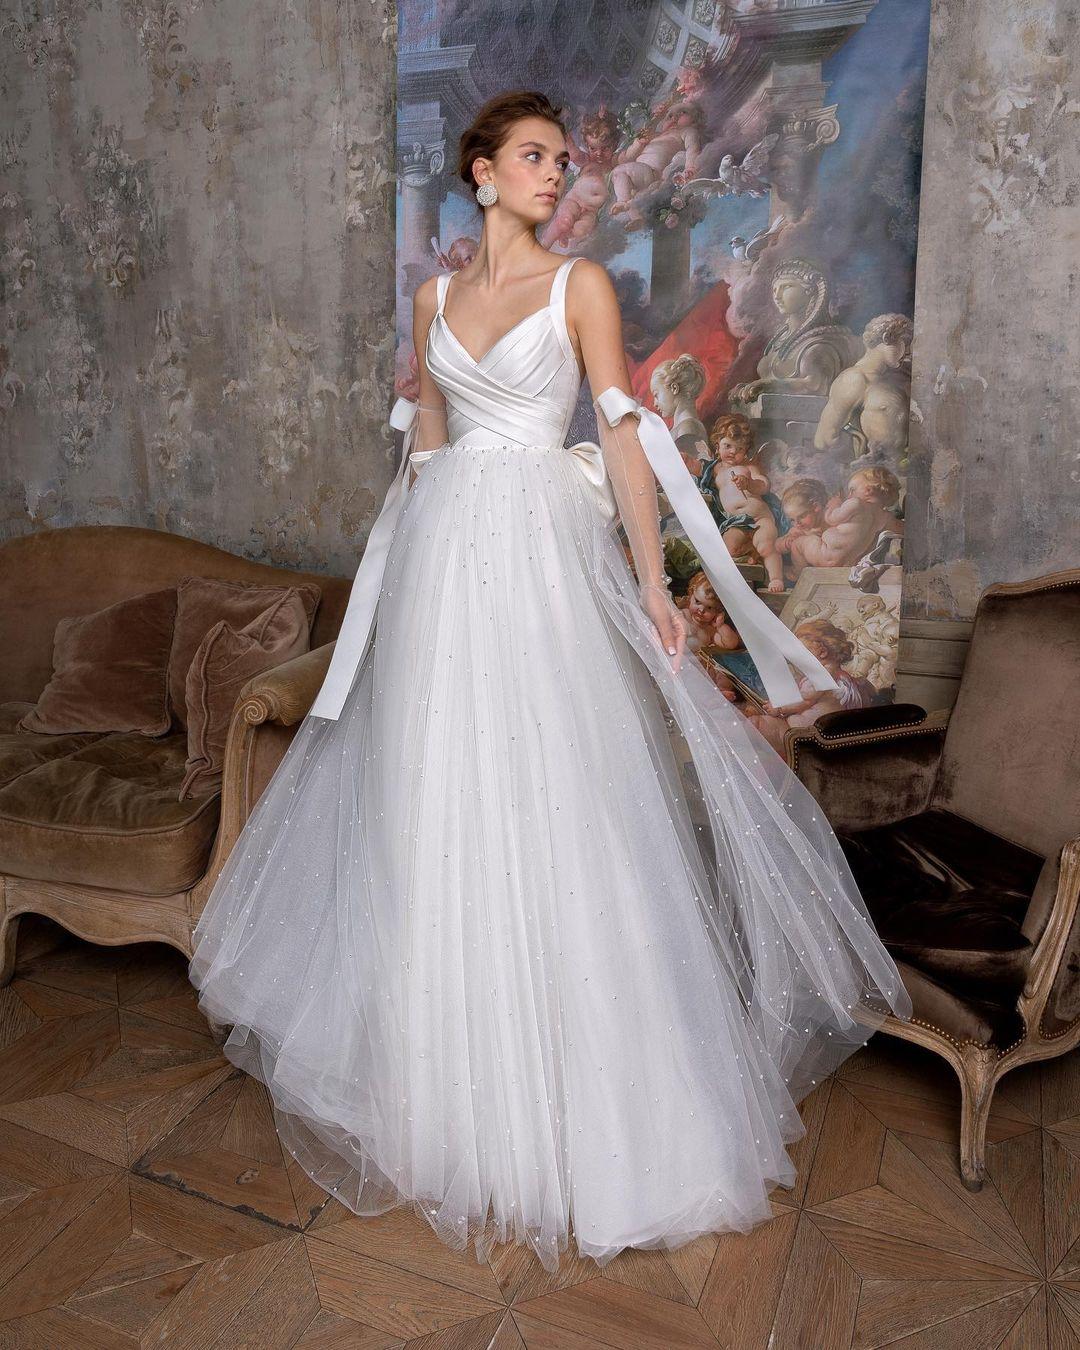 class="content__text"
 Selection of classic princess-silhouette wedding gowns from the collection “Perla Rosa” 
 